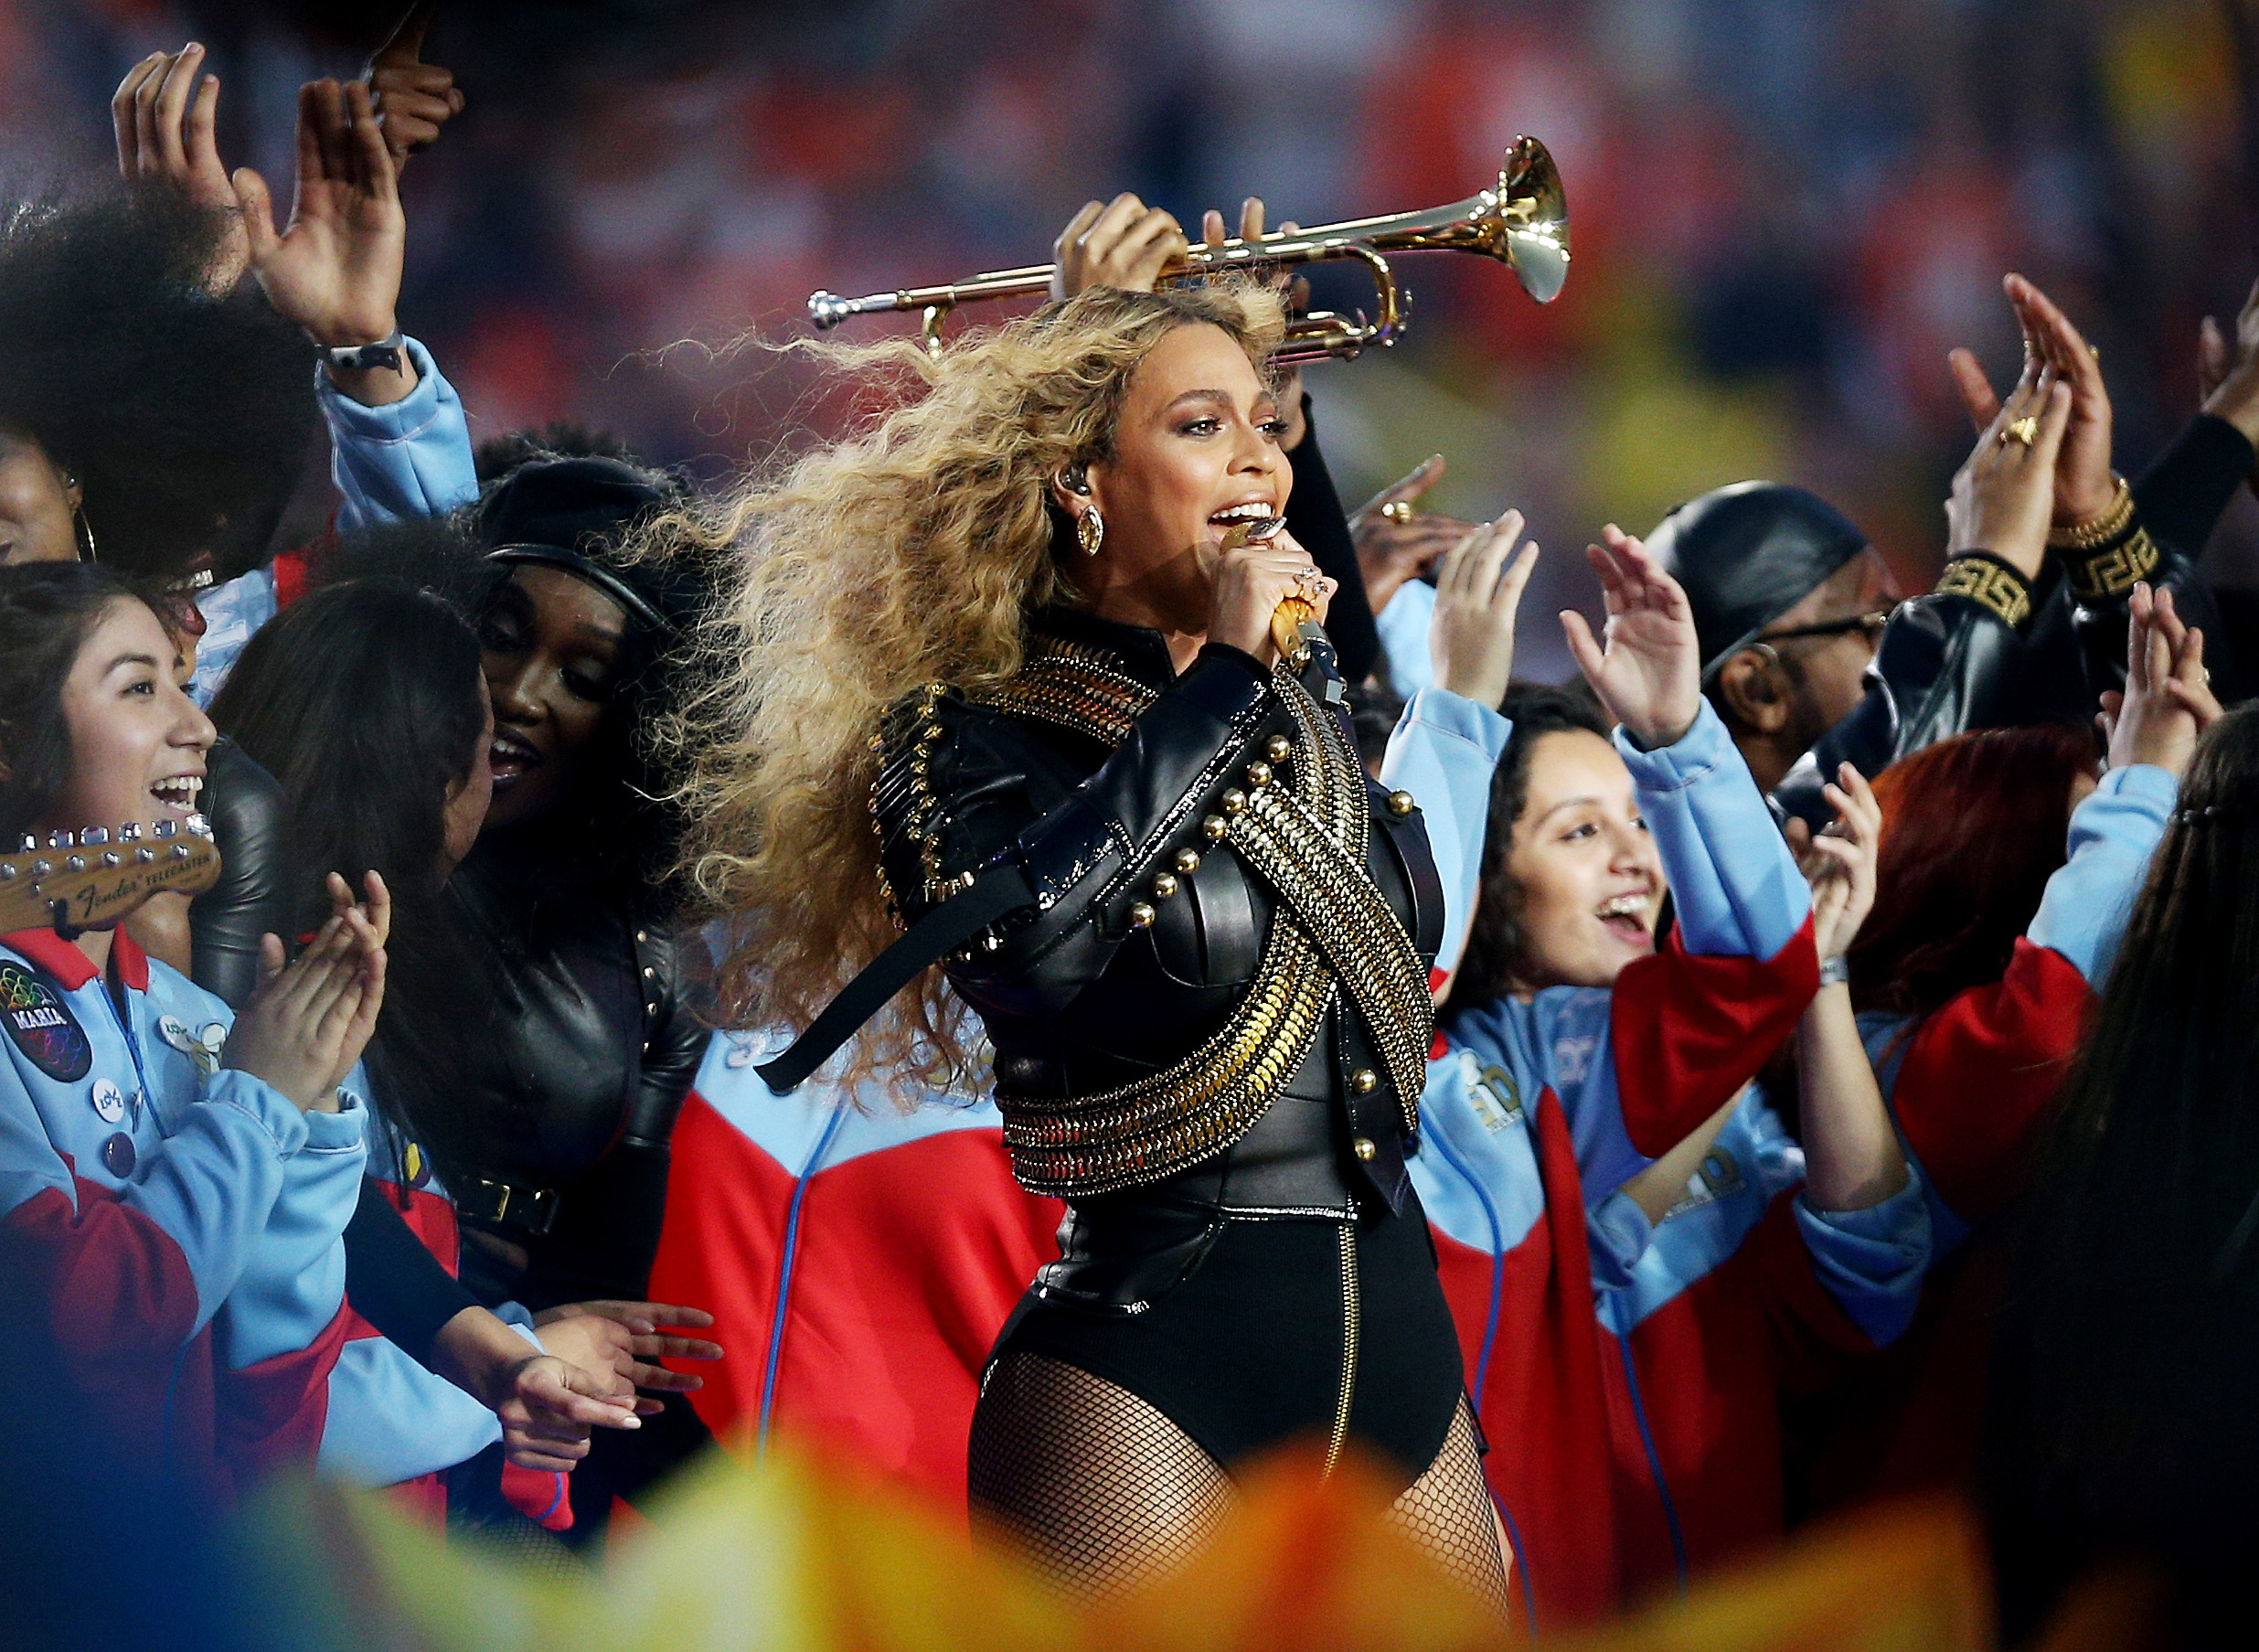 Watch: 8 Best Super Bowl Halftime Performances Of All Time